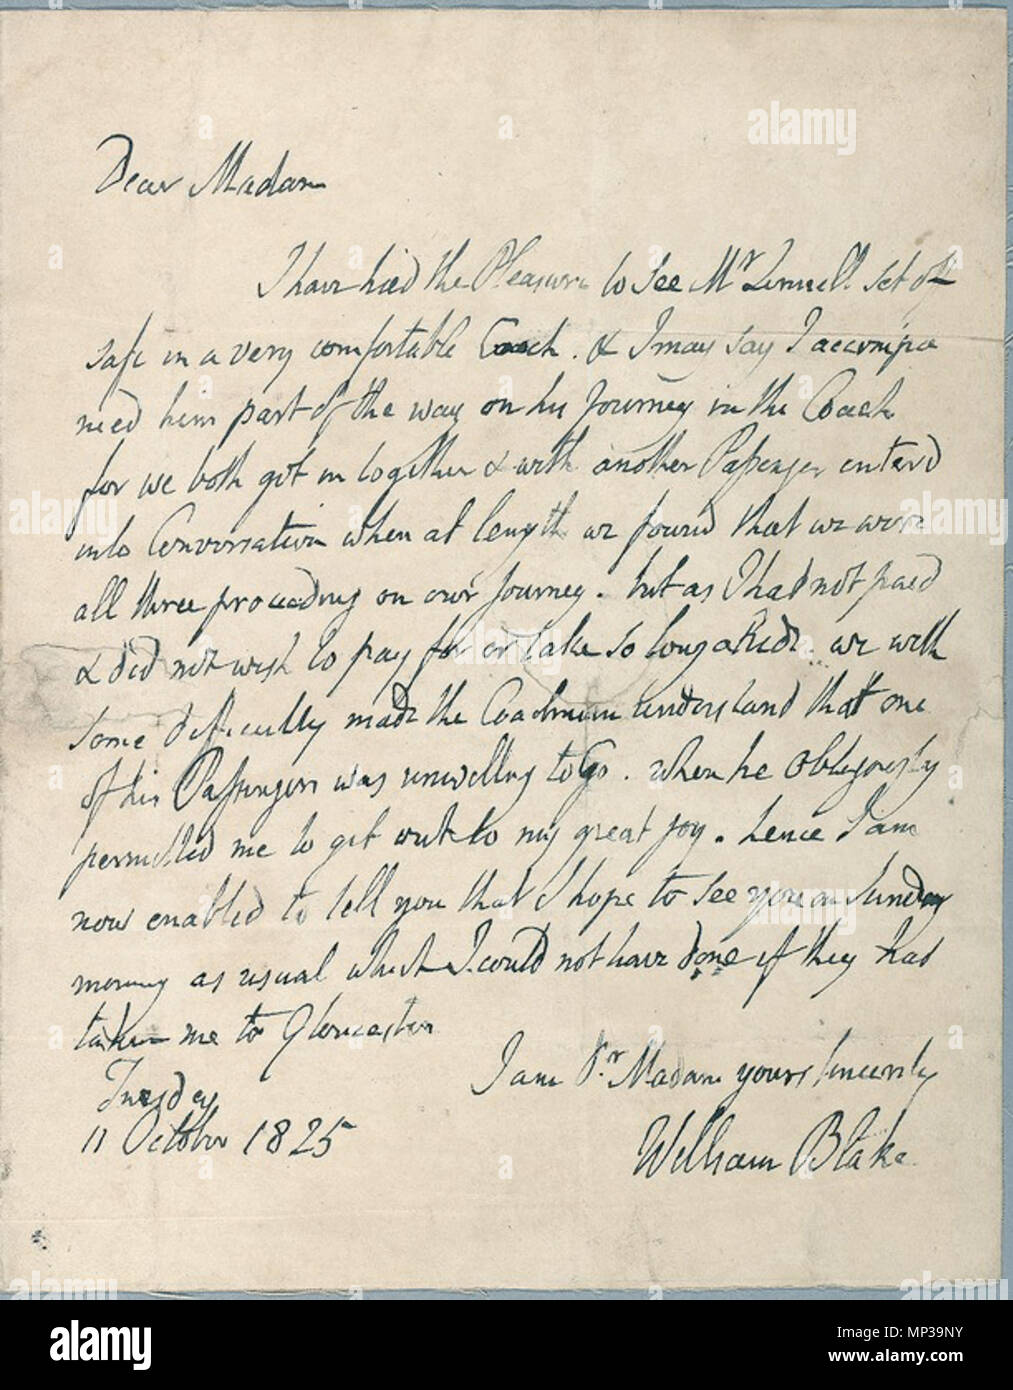 . English: Letter to Mary Ann Linnell, wife of John Linnell, 11 October 1825, object 2 . 17 November 2010, 07:30:21.   William Blake  (1757–1827)       Alternative names W. Blake; Uil'iam Bleik  Description British painter, poet, writer, theologian, collector and engraver  Date of birth/death 28 November 1757 12 August 1827  Location of birth/death Broadwick Street Charing Cross  Work location London  Authority control  : Q41513 VIAF: 54144439 ISNI: 0000 0001 2096 135X ULAN: 500012489 LCCN: n78095331 NLA: 35019221 WorldCat      The William Blake Archive      Location Digital Collection hosted  Stock Photo